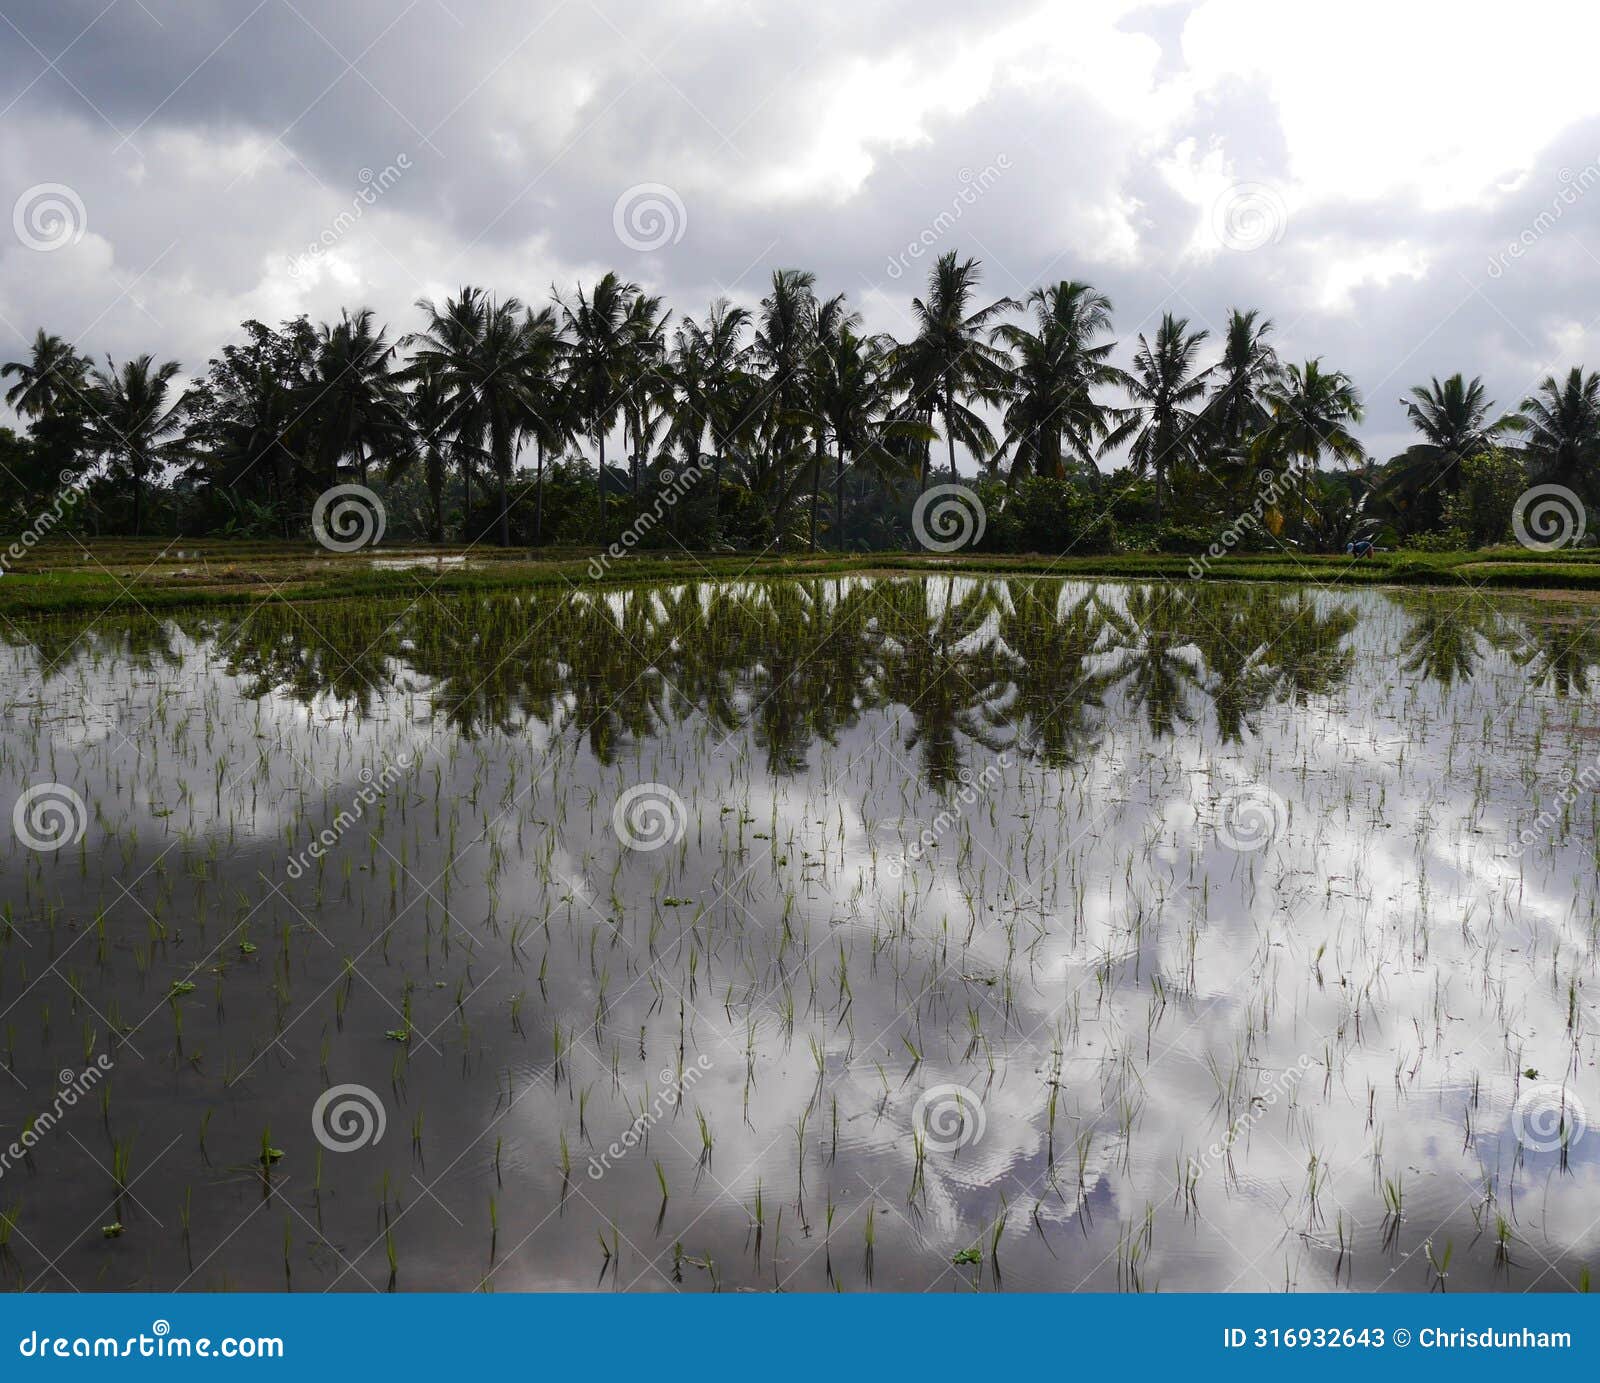 view of rice paddies with palms reflected in water, bali, indonesia